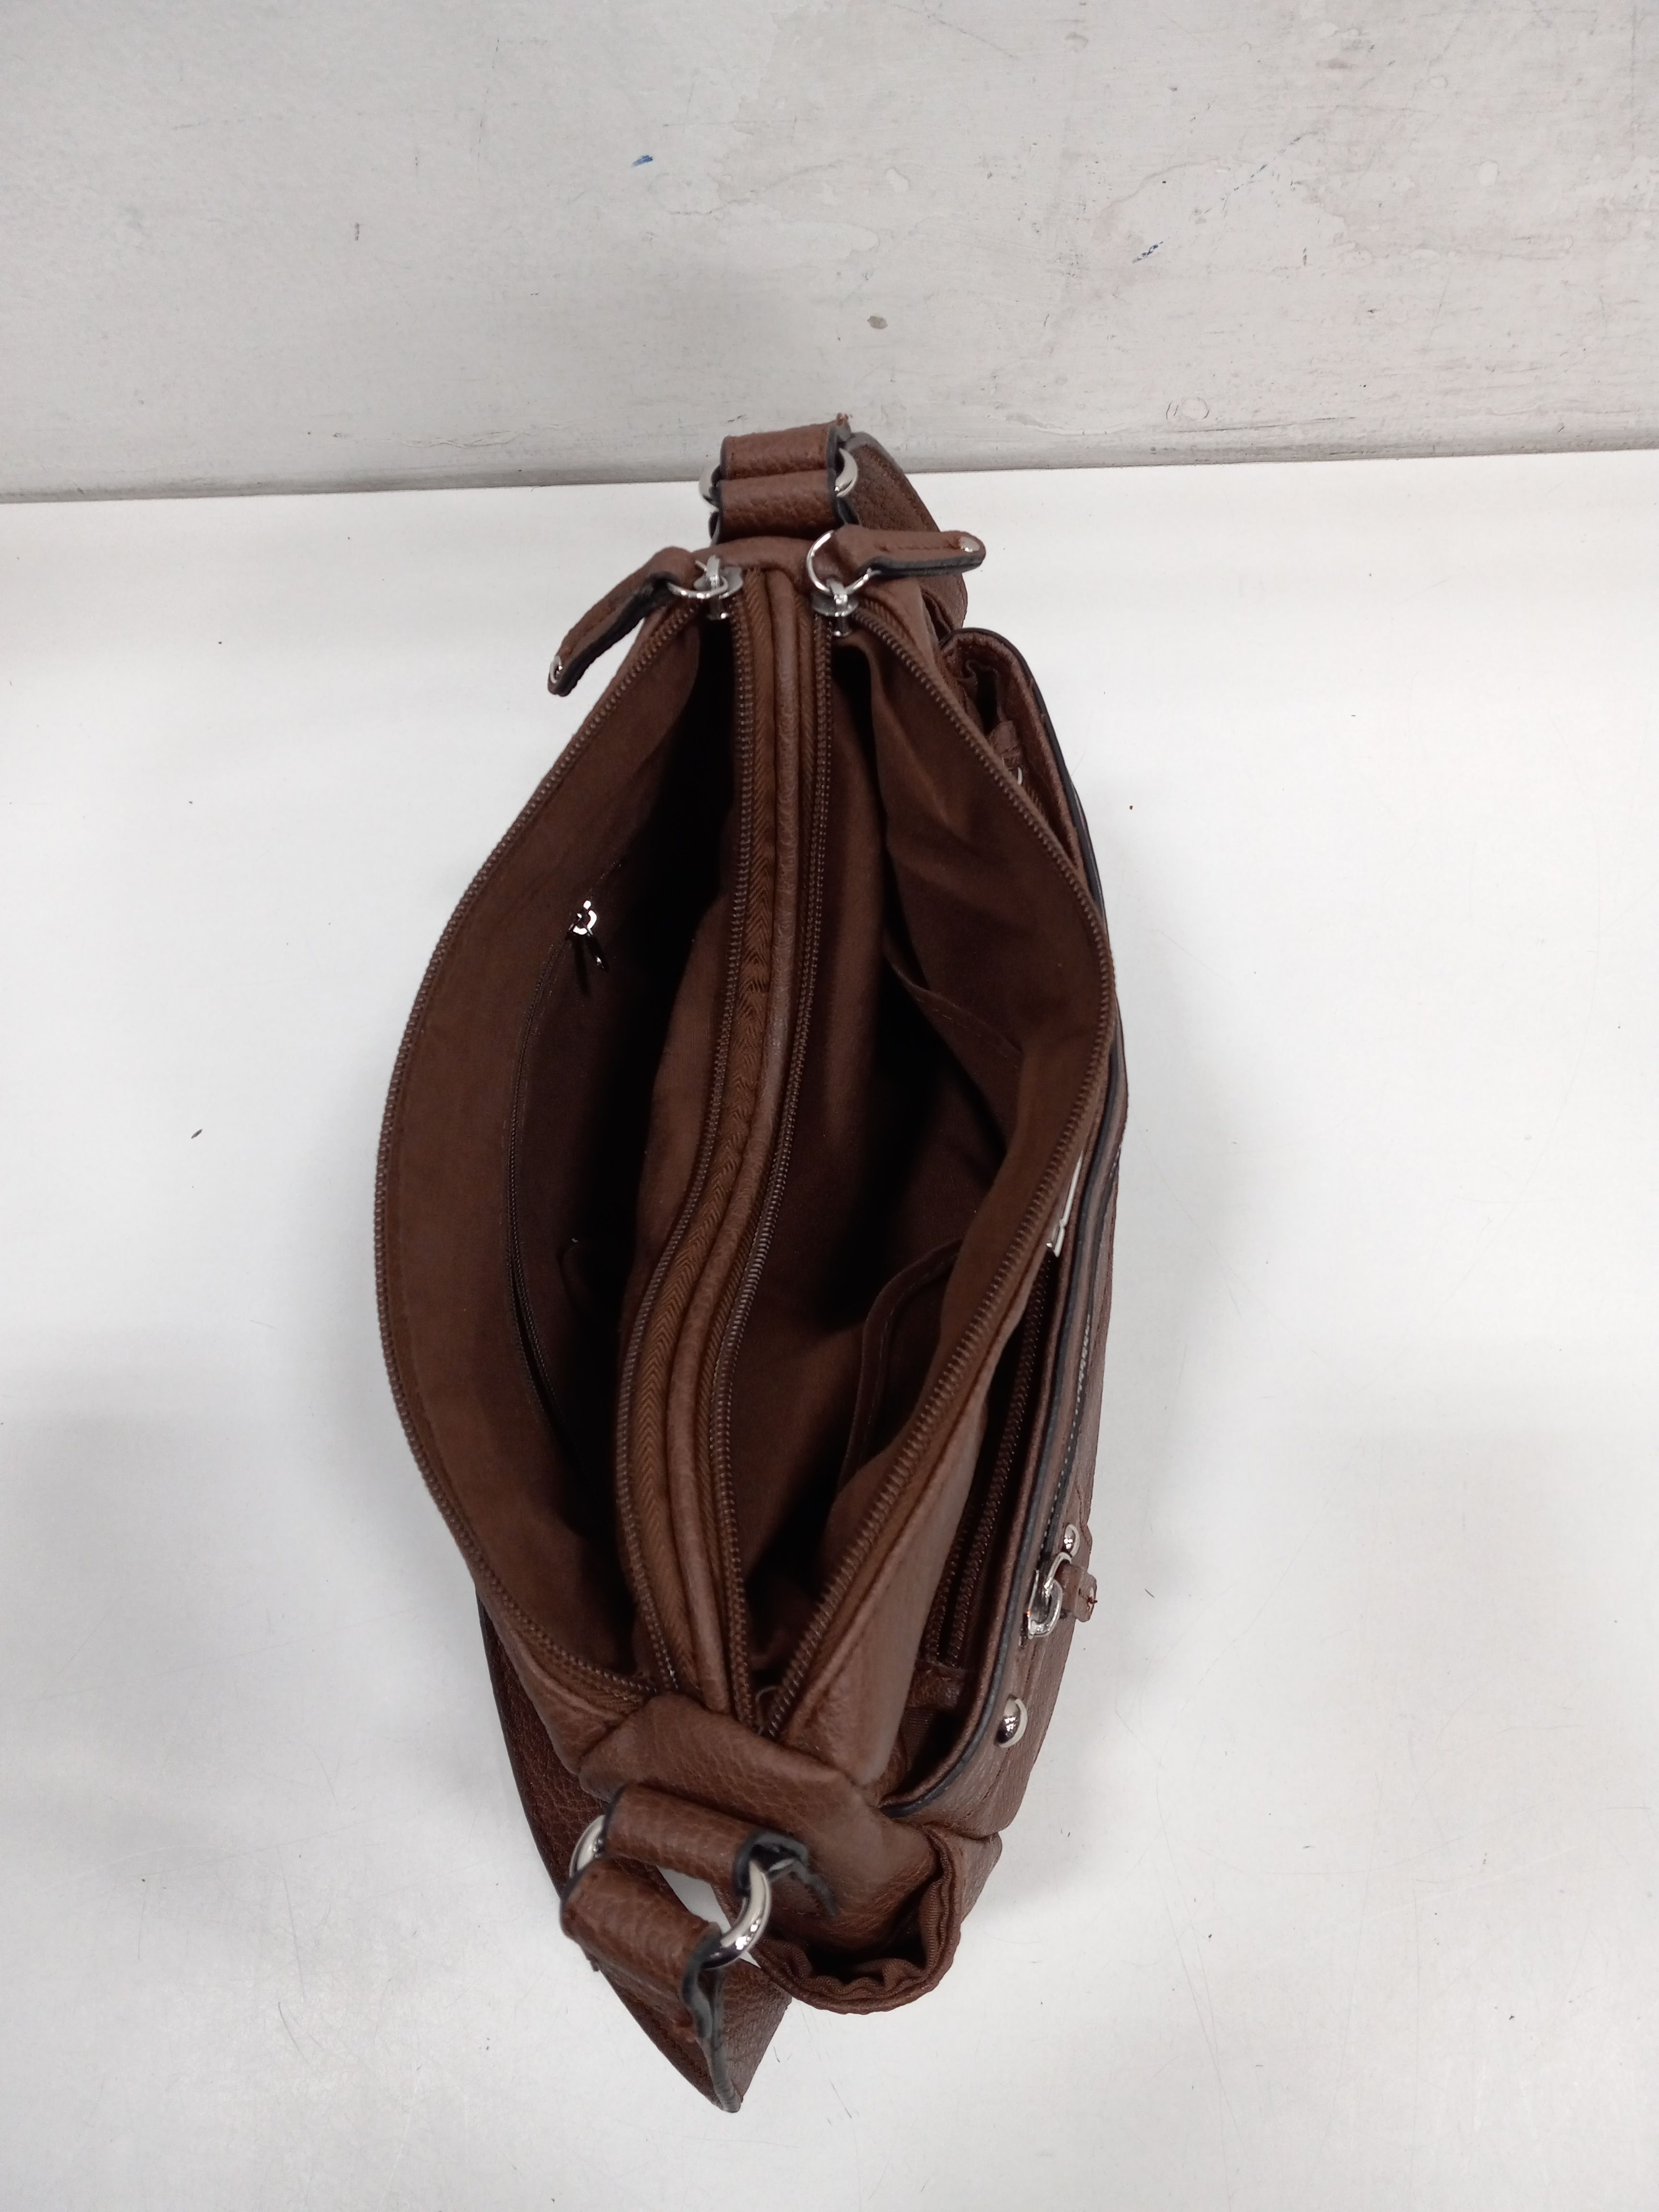 JACLYN SMITH- BROWN Leather Purse $30.00 - PicClick